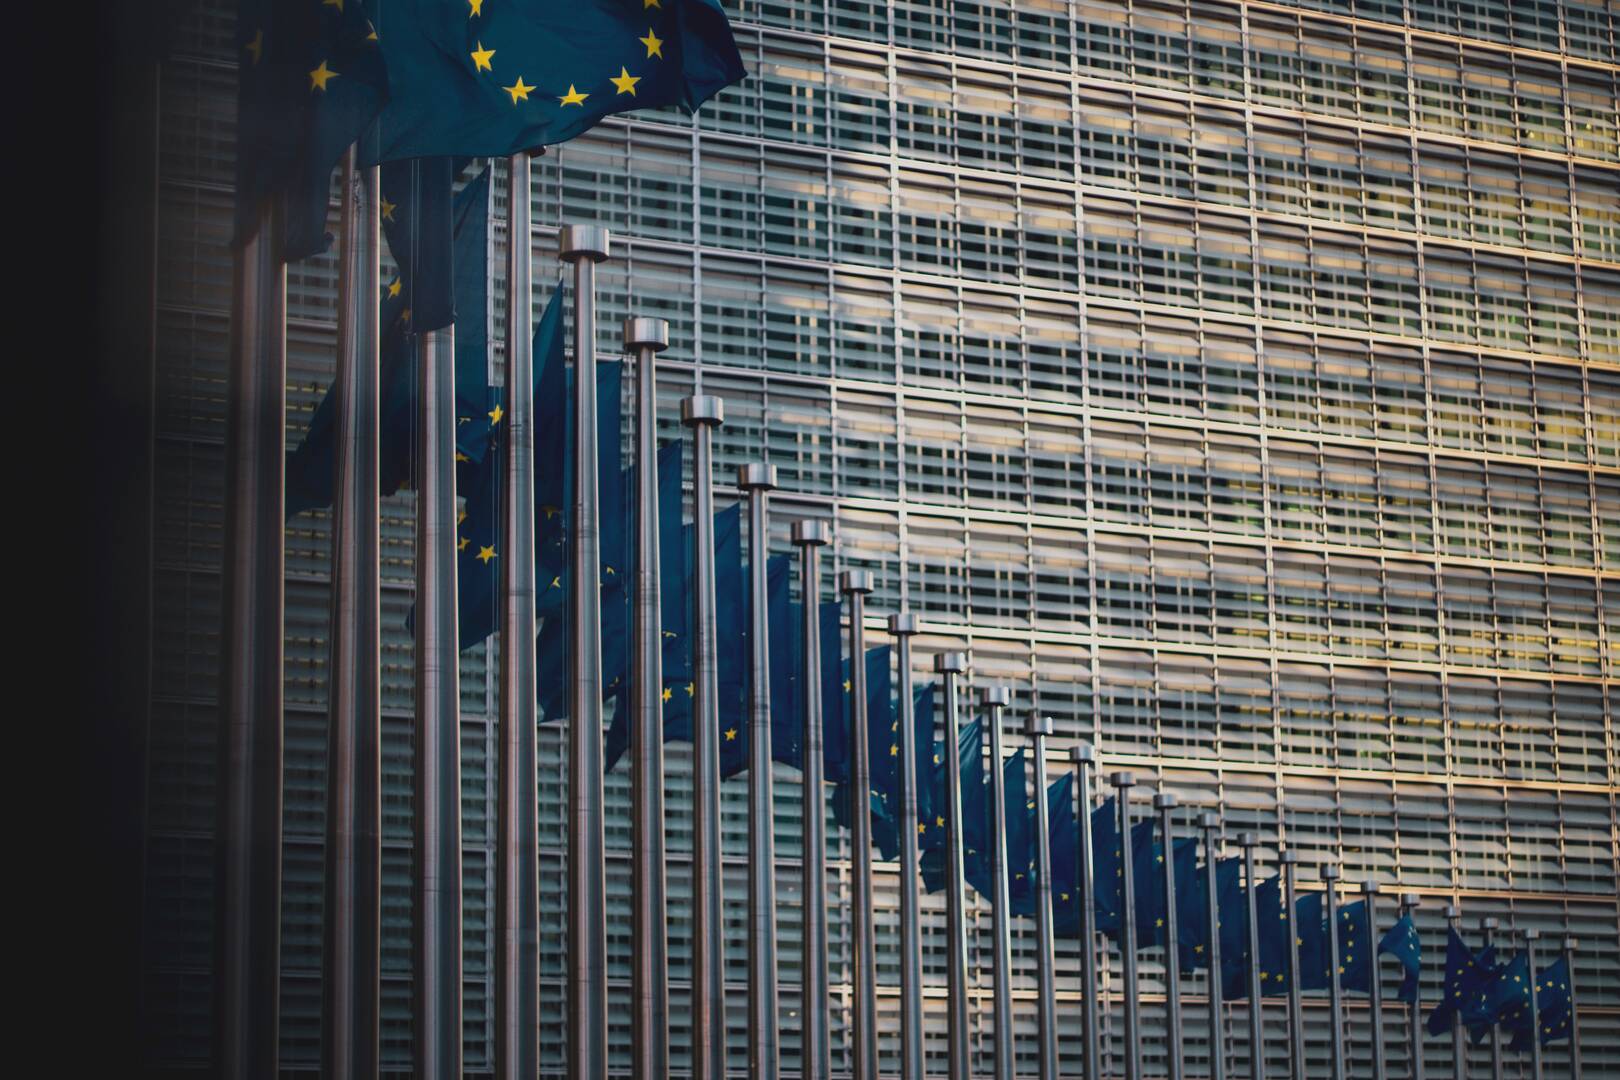 EU flags in front of the Berlaymont building.